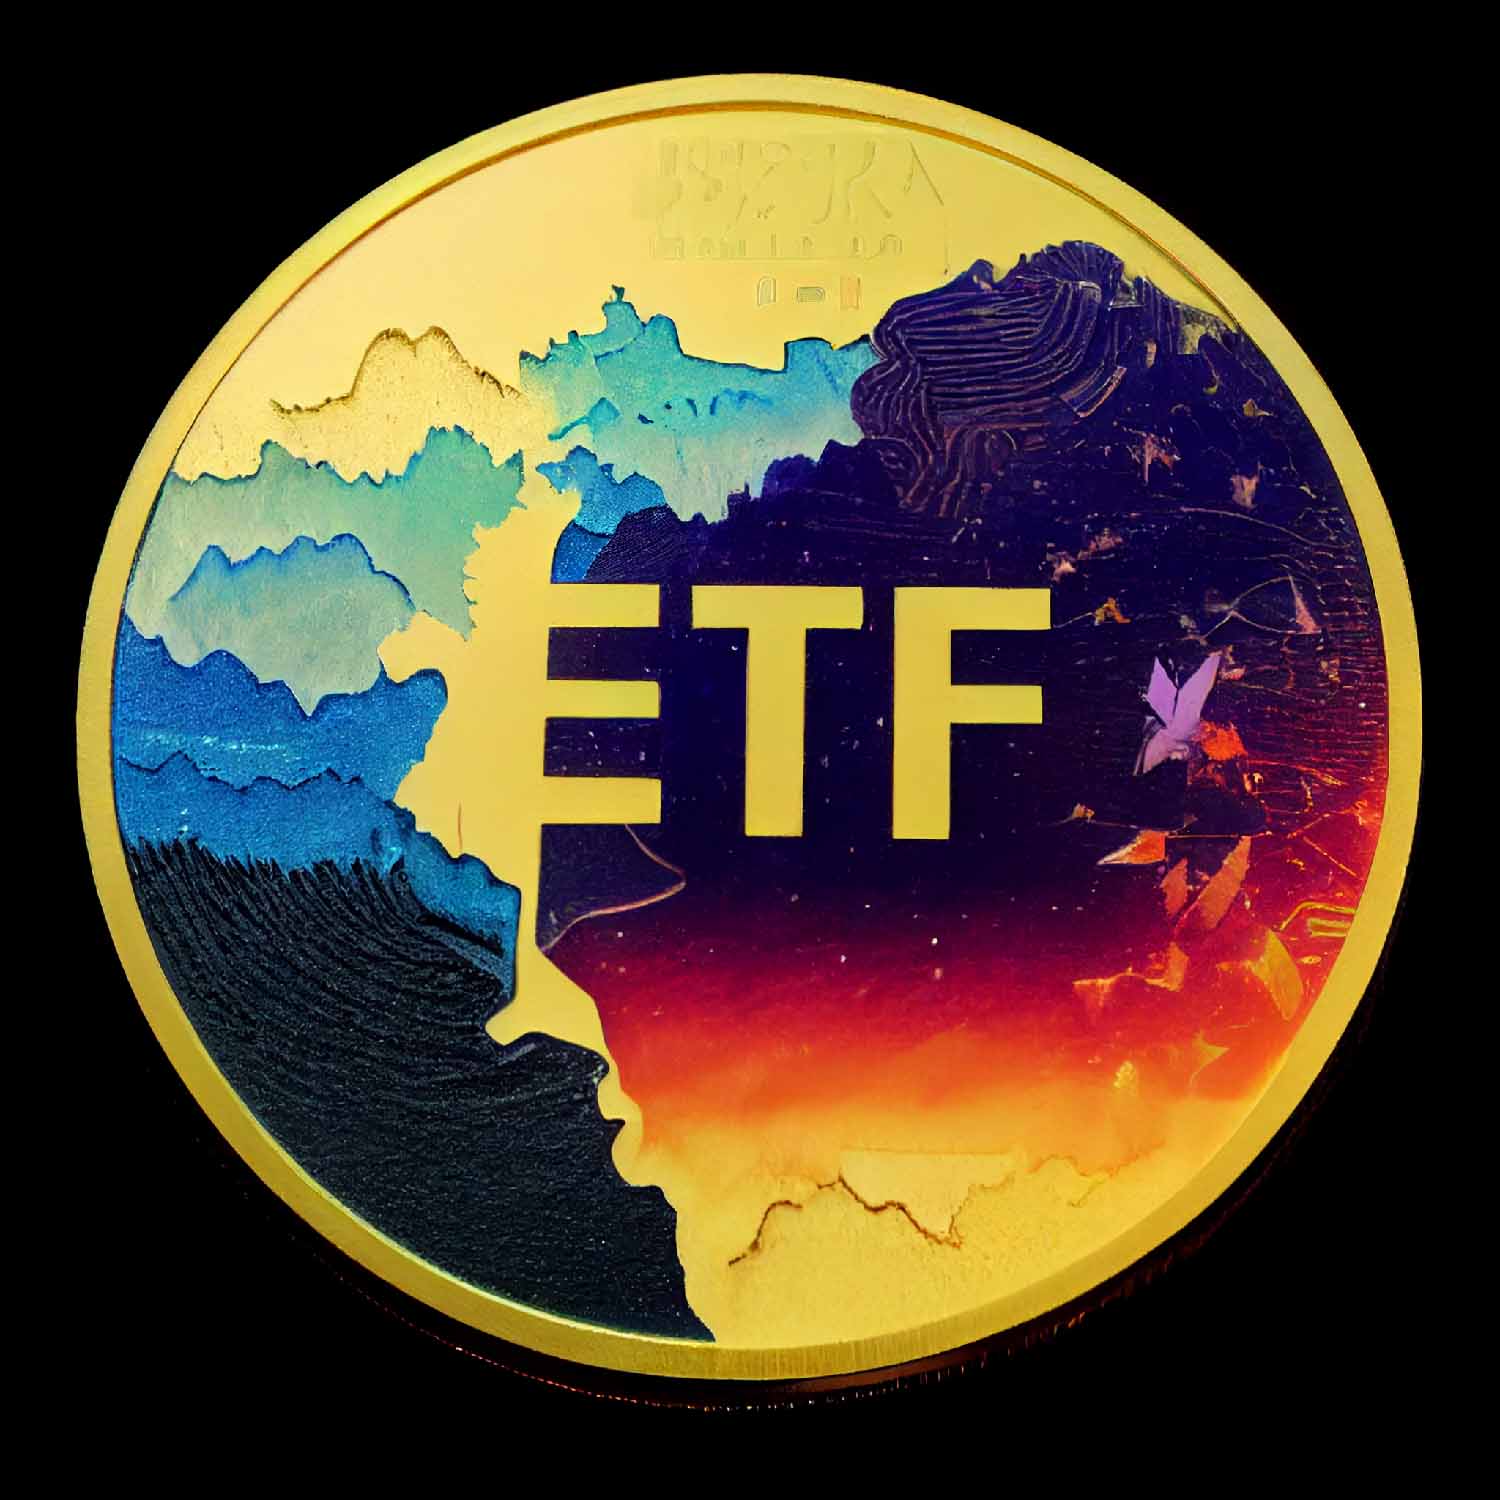 an image of a digital coin. Golden base with colorful crontrast of earth and universe. The text ETF in the center